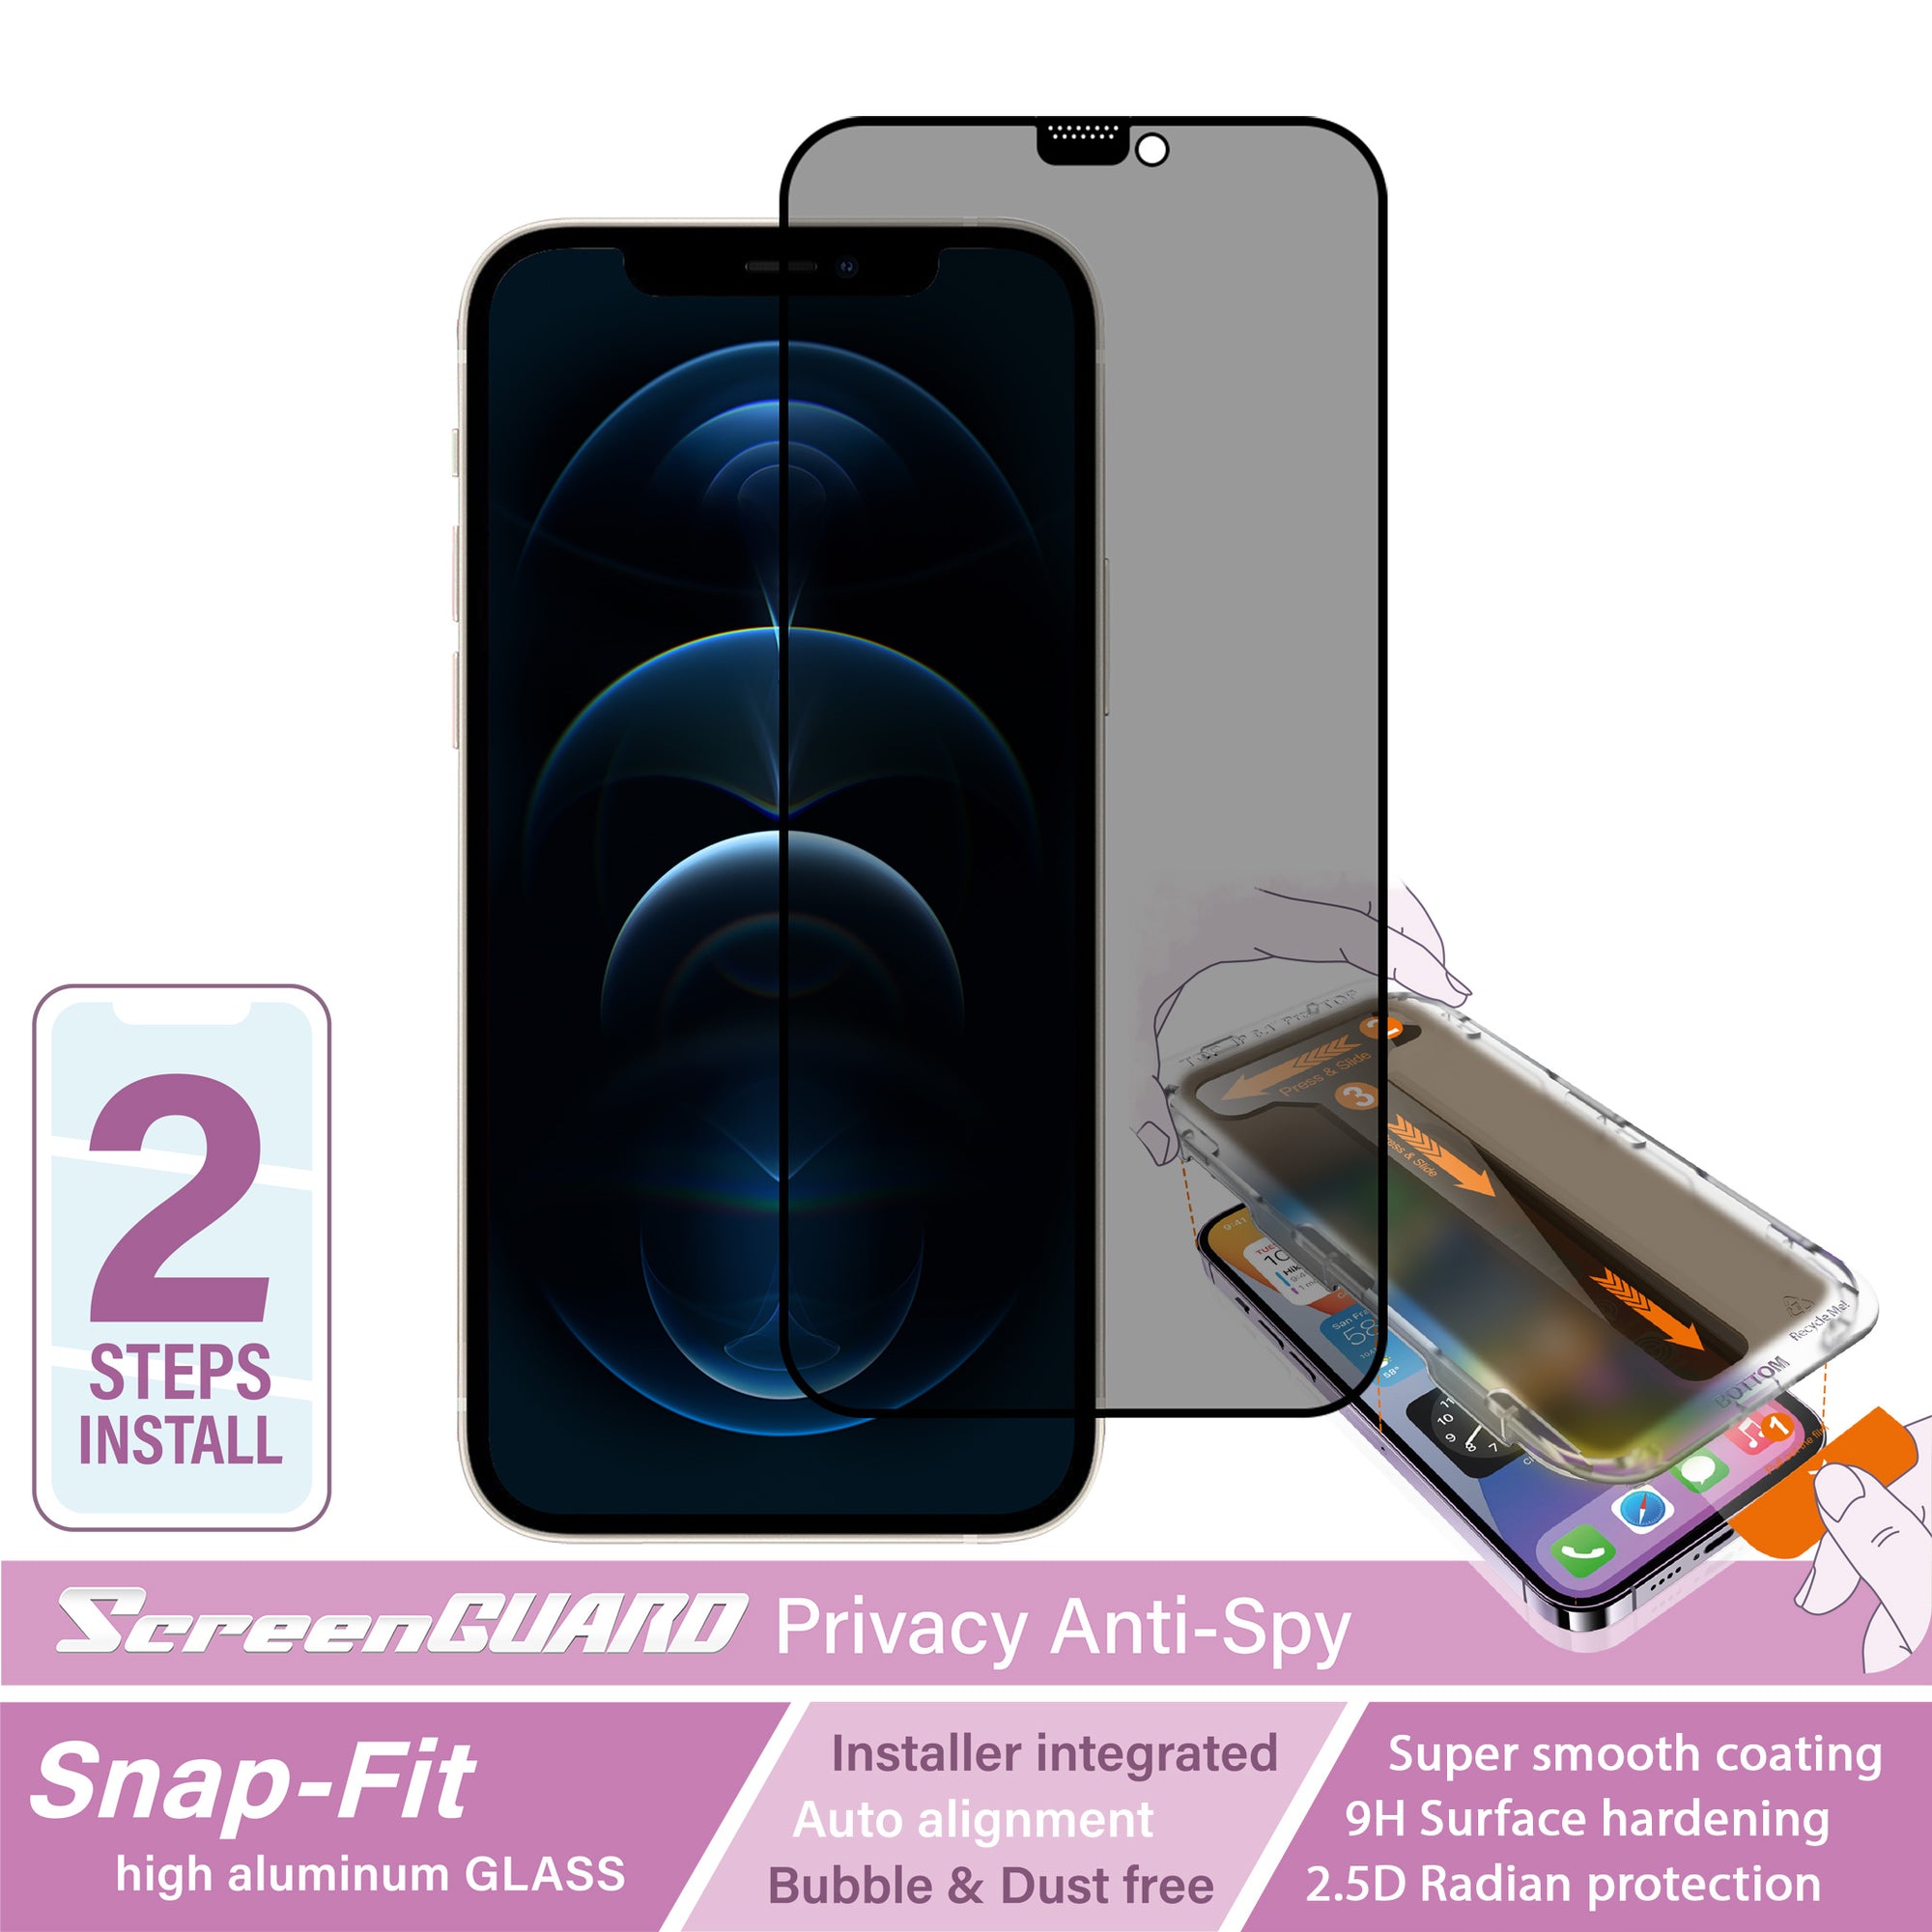 iPhone 12 Pro Max SnapFit High Aluminum Glass Privacy Screen Protector